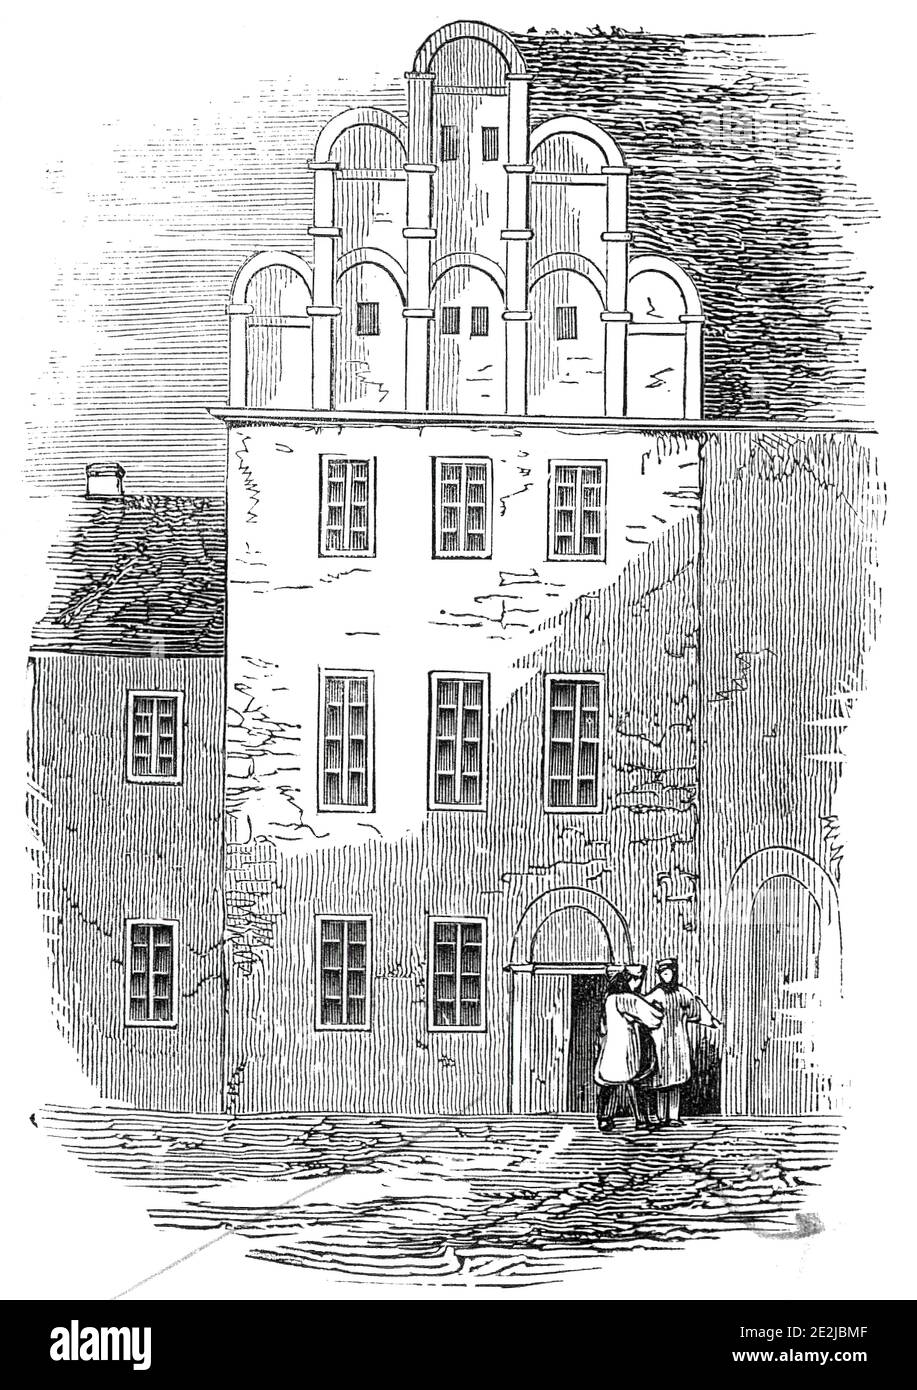 Melancthon's House, at Wittenberg, 1845. The Melanchthonhaus, home of German theologian and Protestant reformer Philipp Melanchthon, at Wittenberg in Germany. It is a Renaissance building with late Gothic arched windows and the broad-tiered gables. From &quot;Illustrated London News&quot;, 1845, Vol VII. Stock Photo